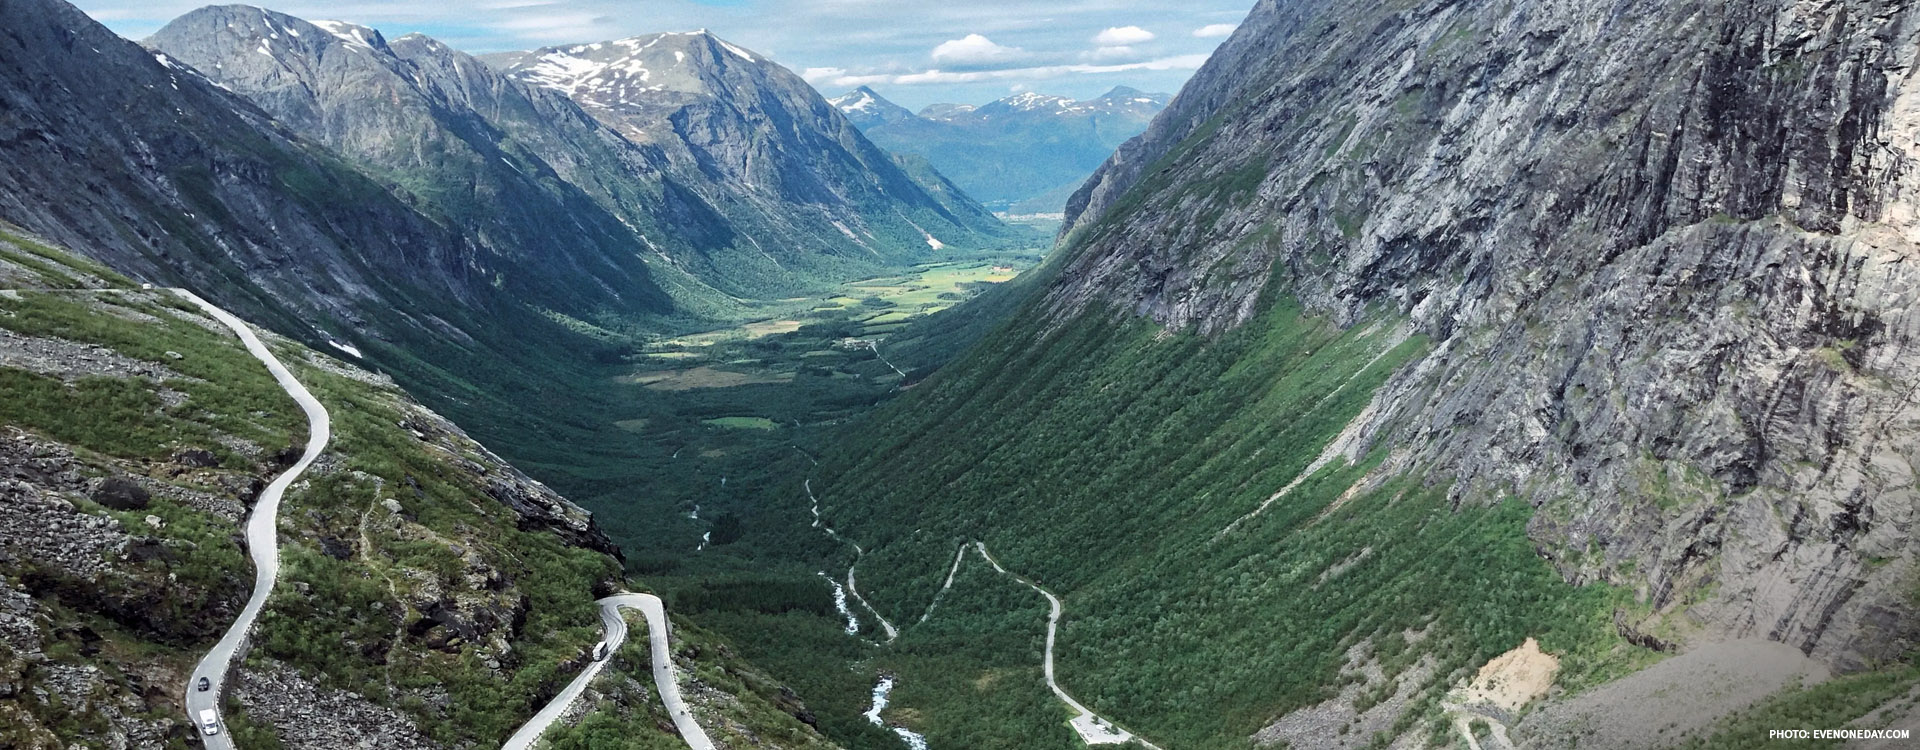 Visiting Norway? Forget fjords, Trollstigen is the main event